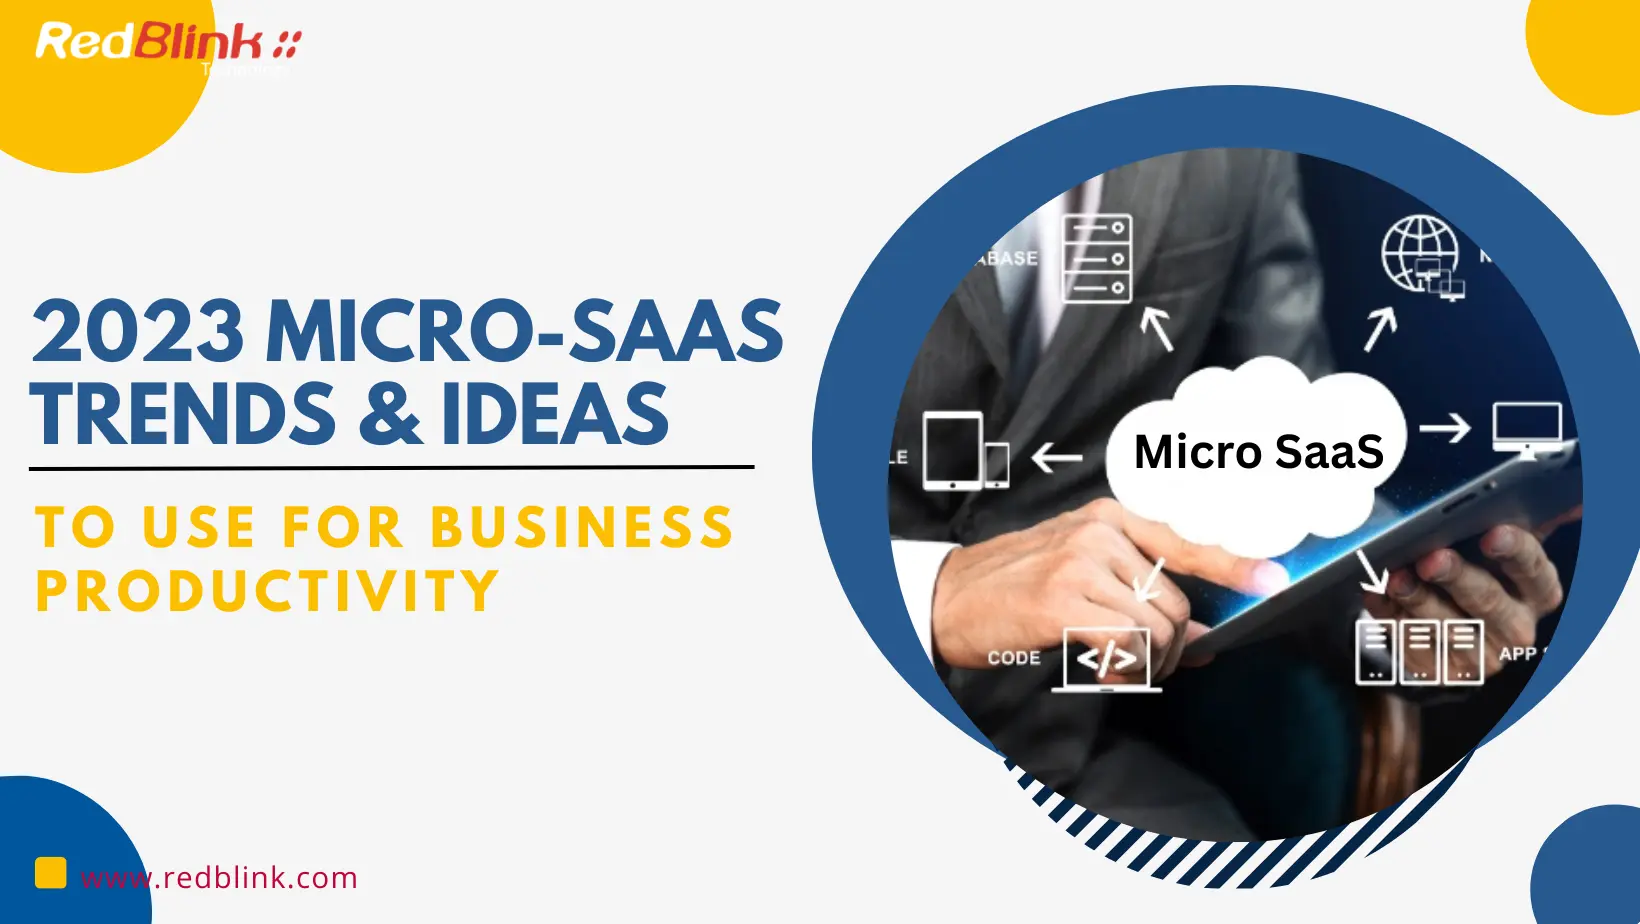 Micro-SaaS Trends for Business Productivity